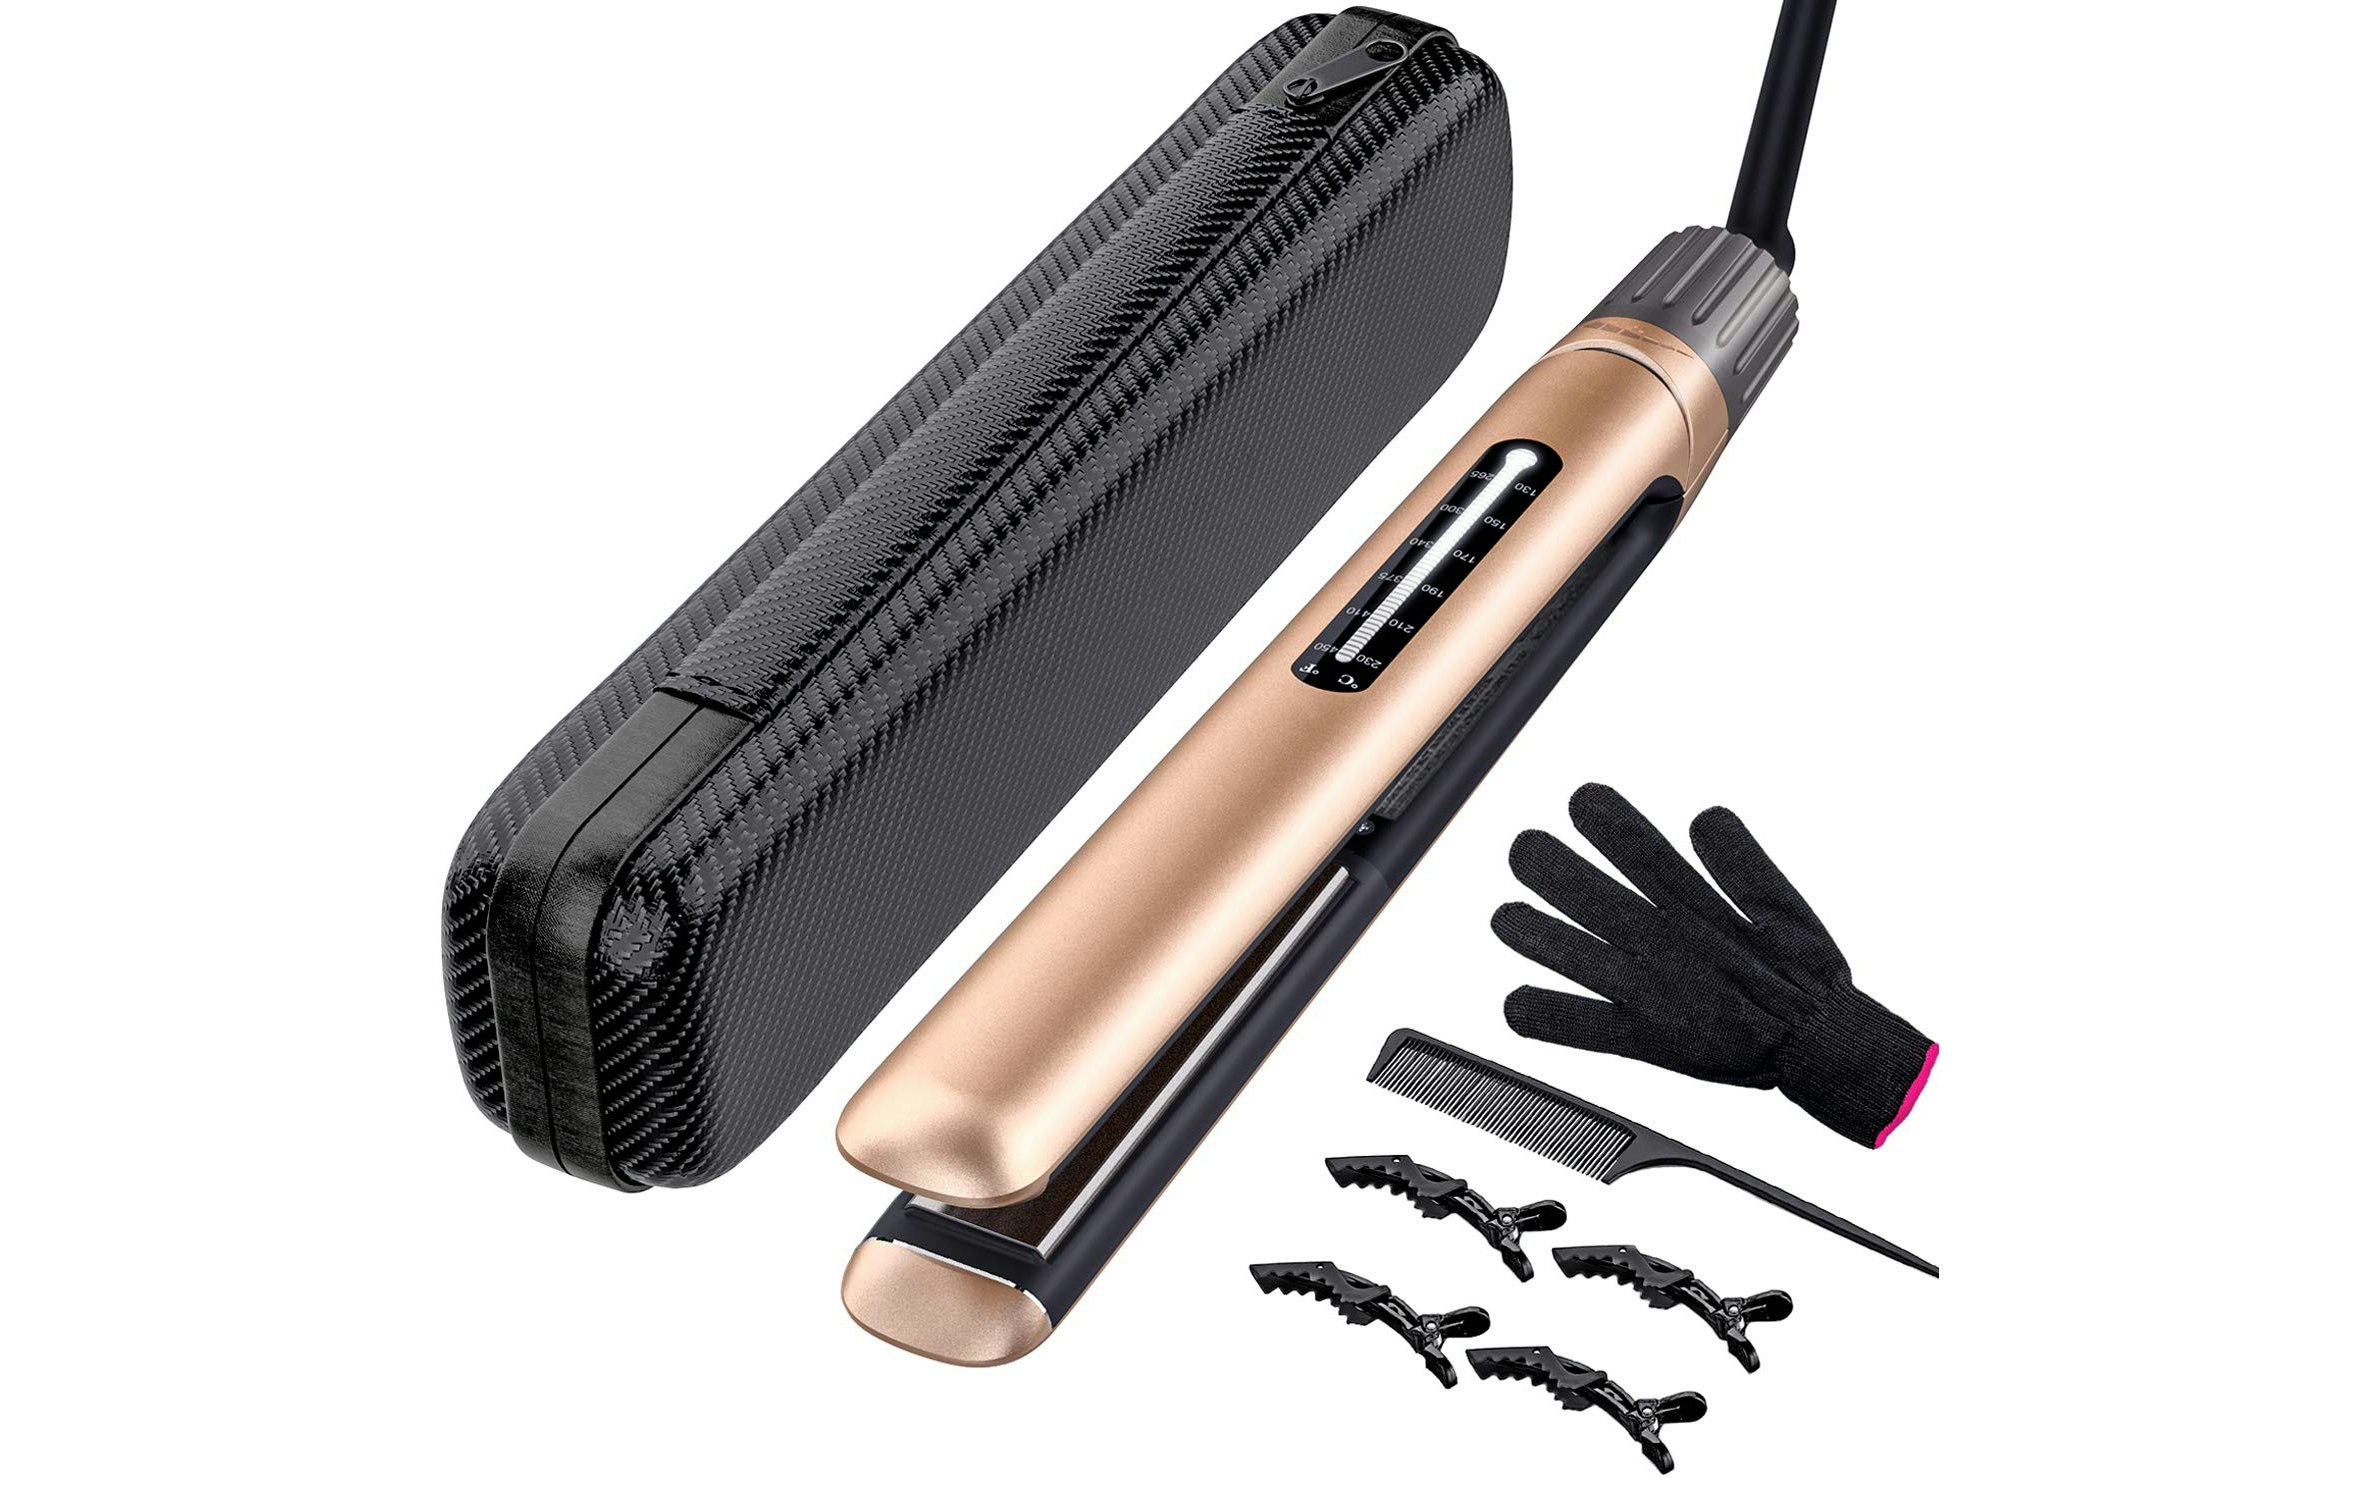 best flat iron for damaged hair